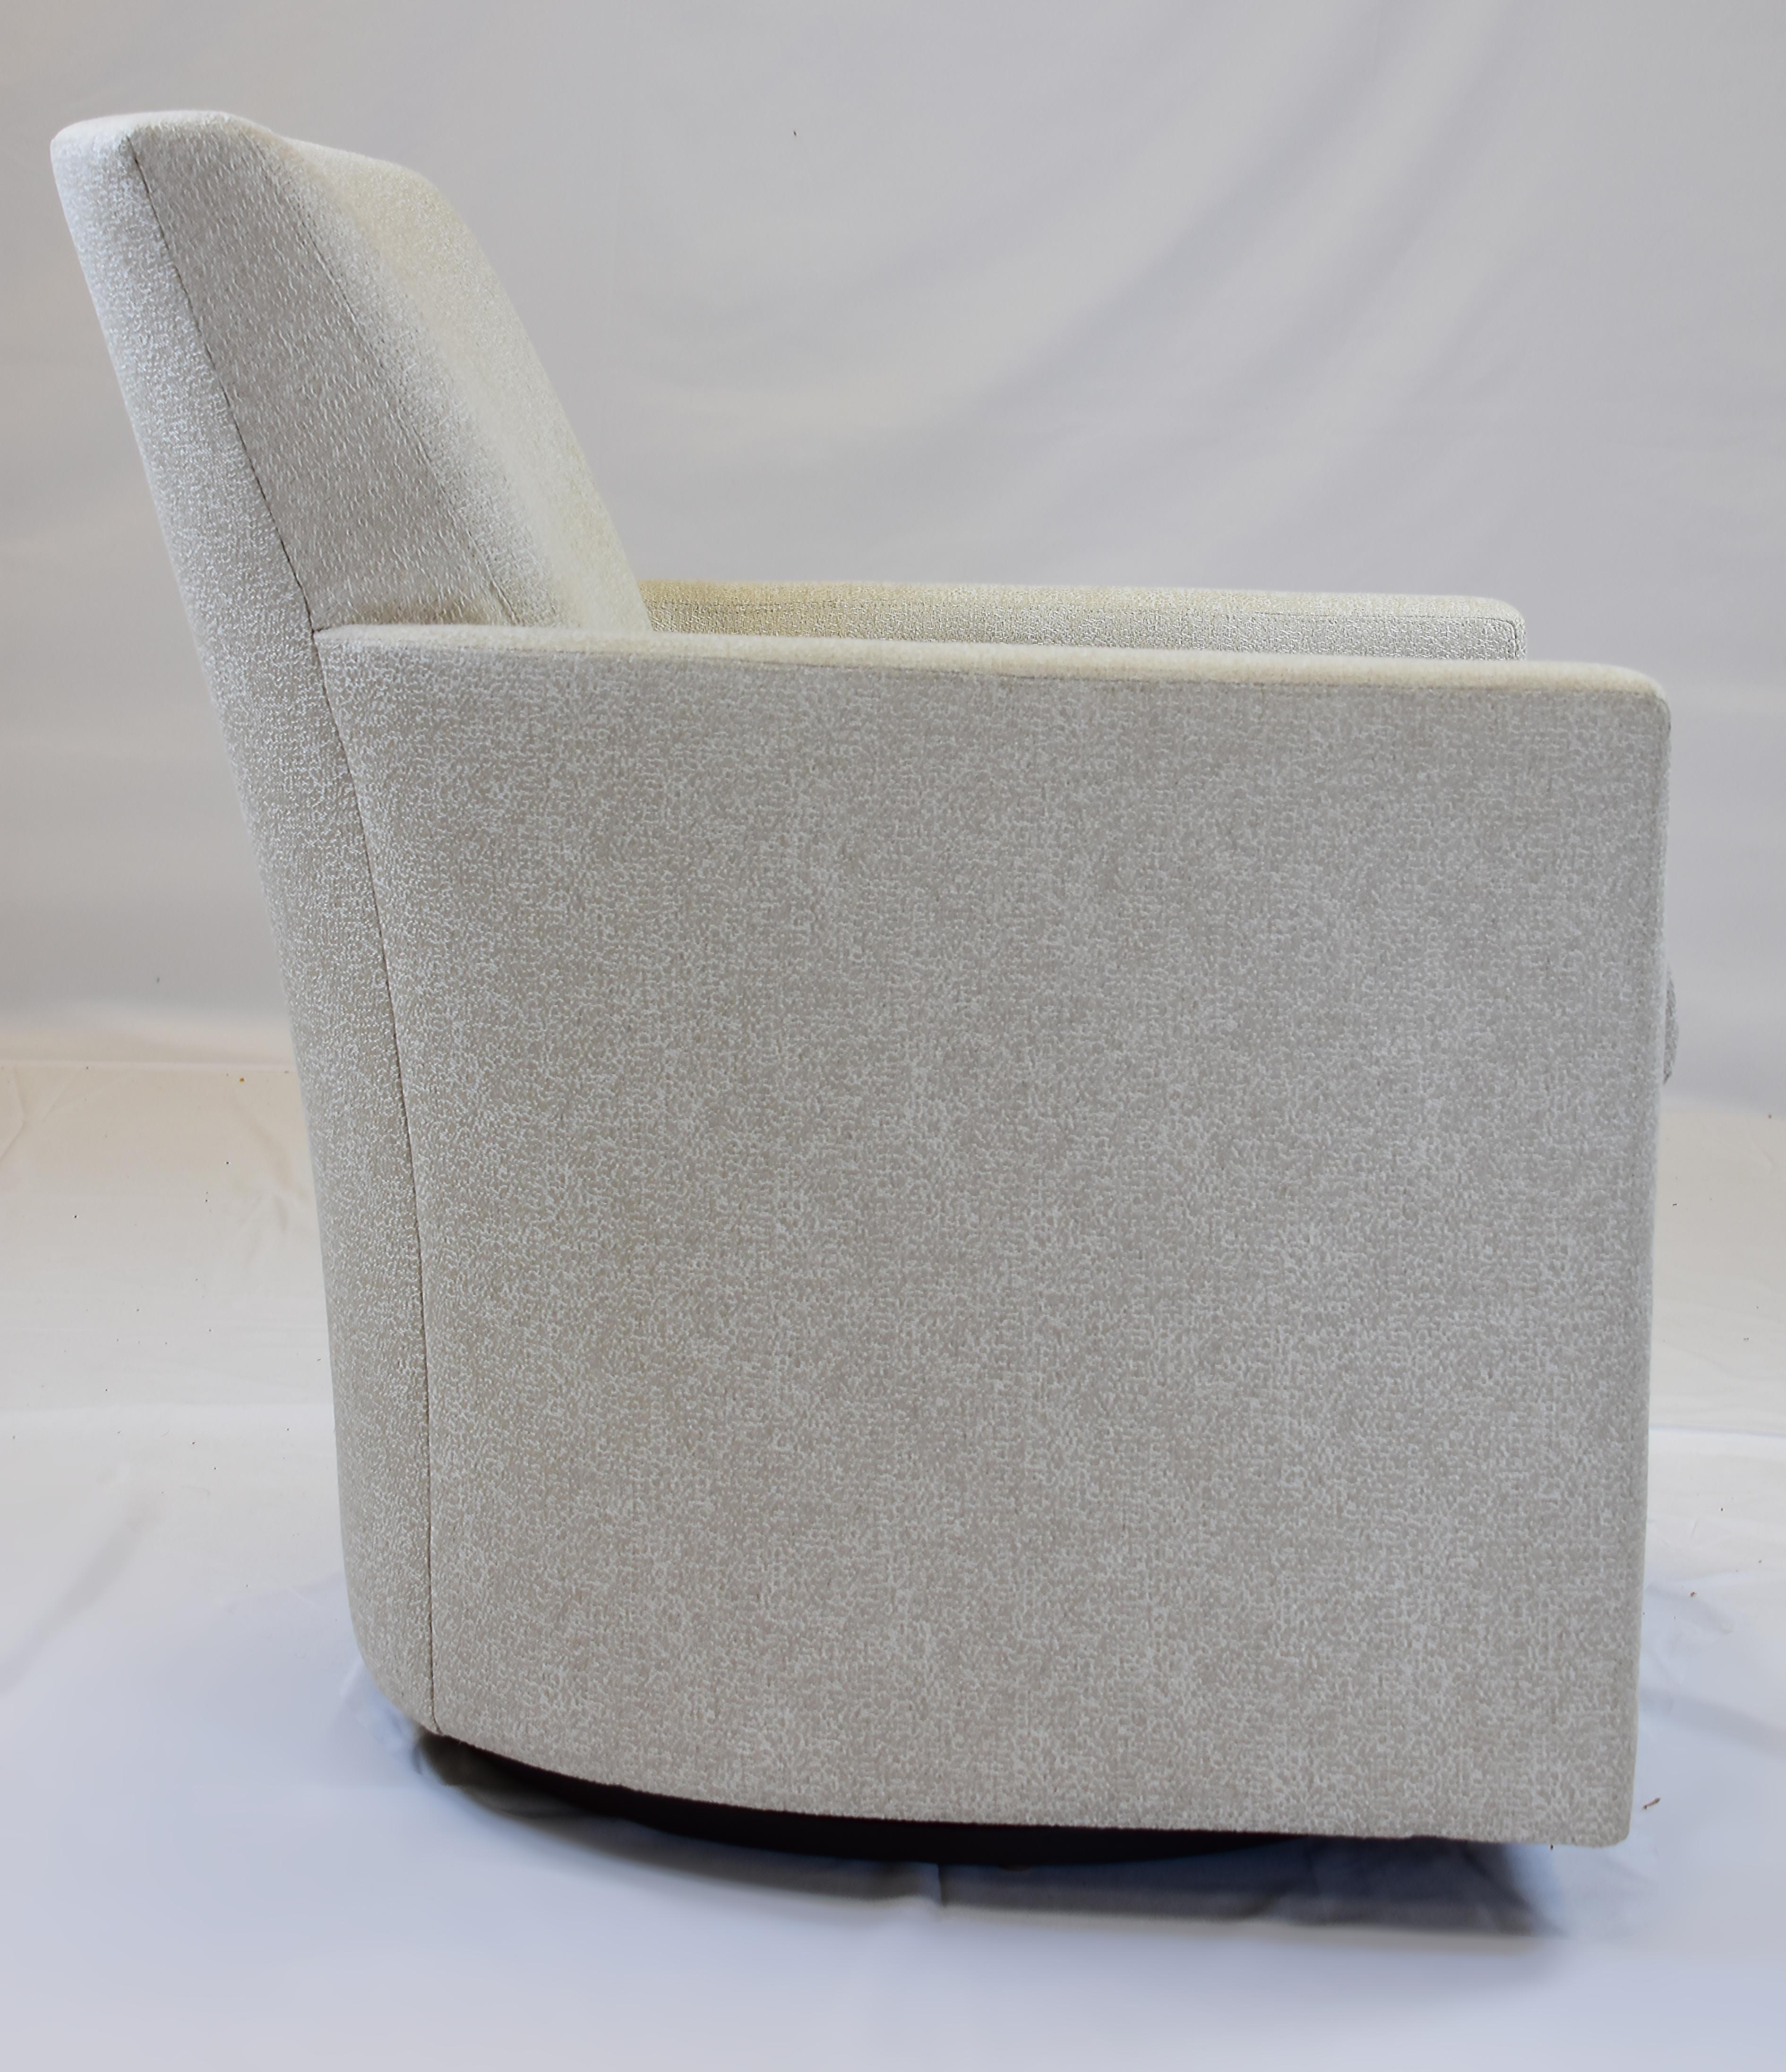 Le Jeune Upholstery Barrel Swivel Kara Chair Showroom Model, 2 Available In Good Condition For Sale In Miami, FL